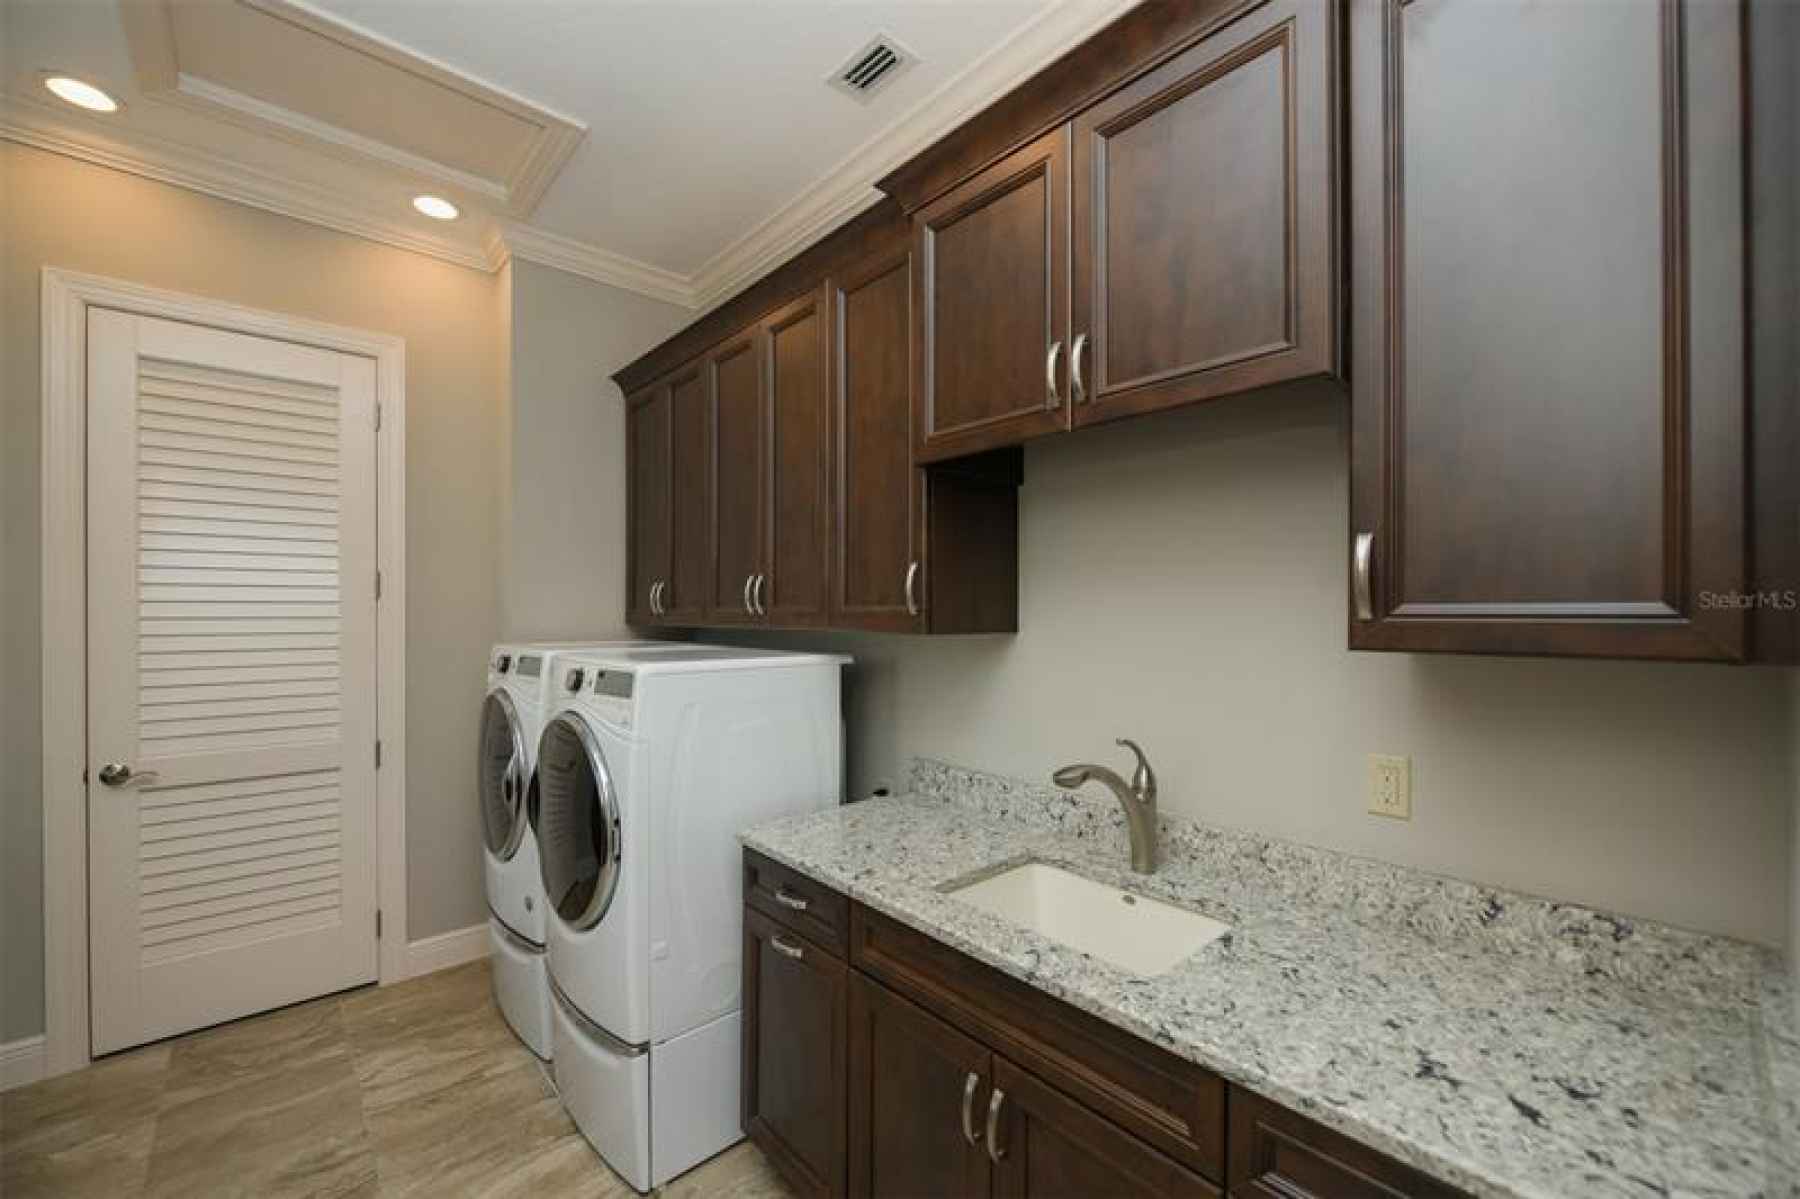 Laundry room with utility sink, folding area, and storage room